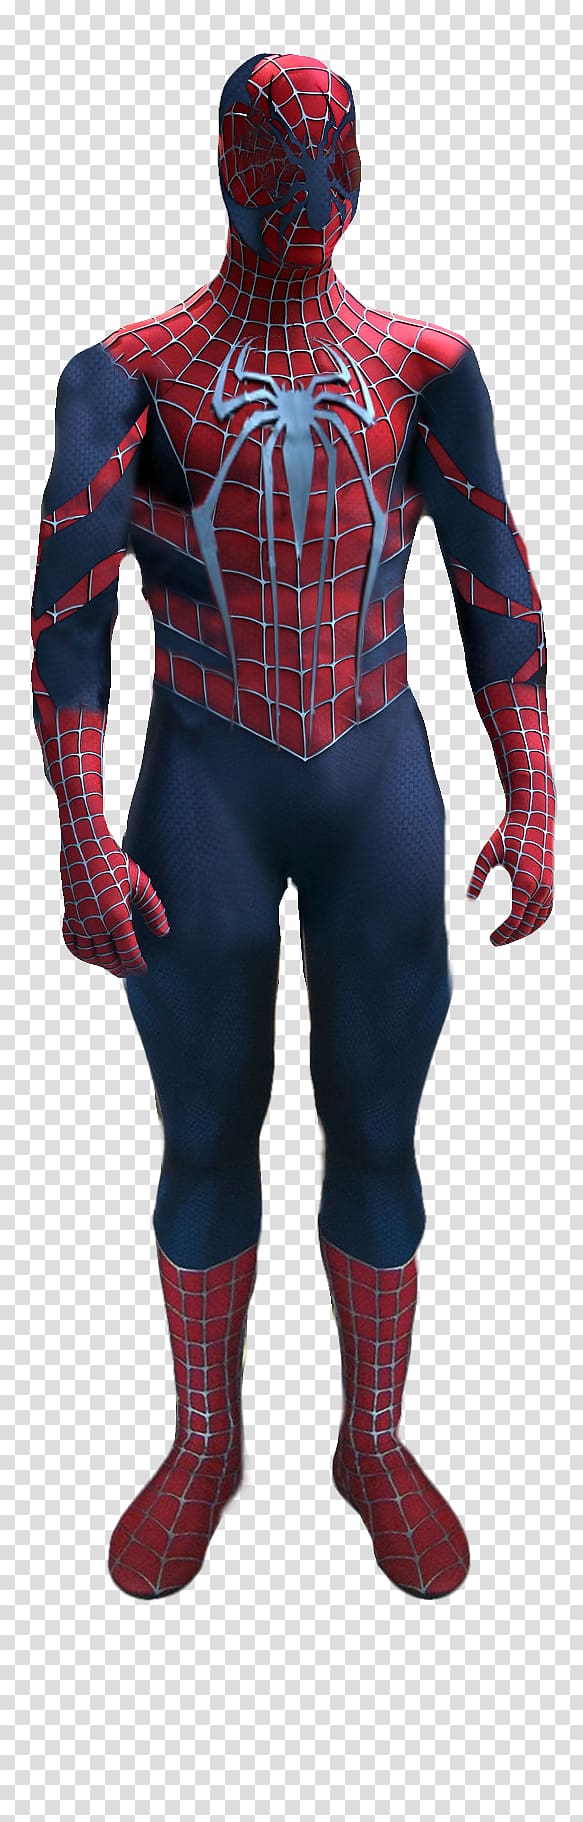 Civil War: The Amazing Spider-Man Concept art Ultimate Spider-Man Drawing, iron spiderman transparent background PNG clipart